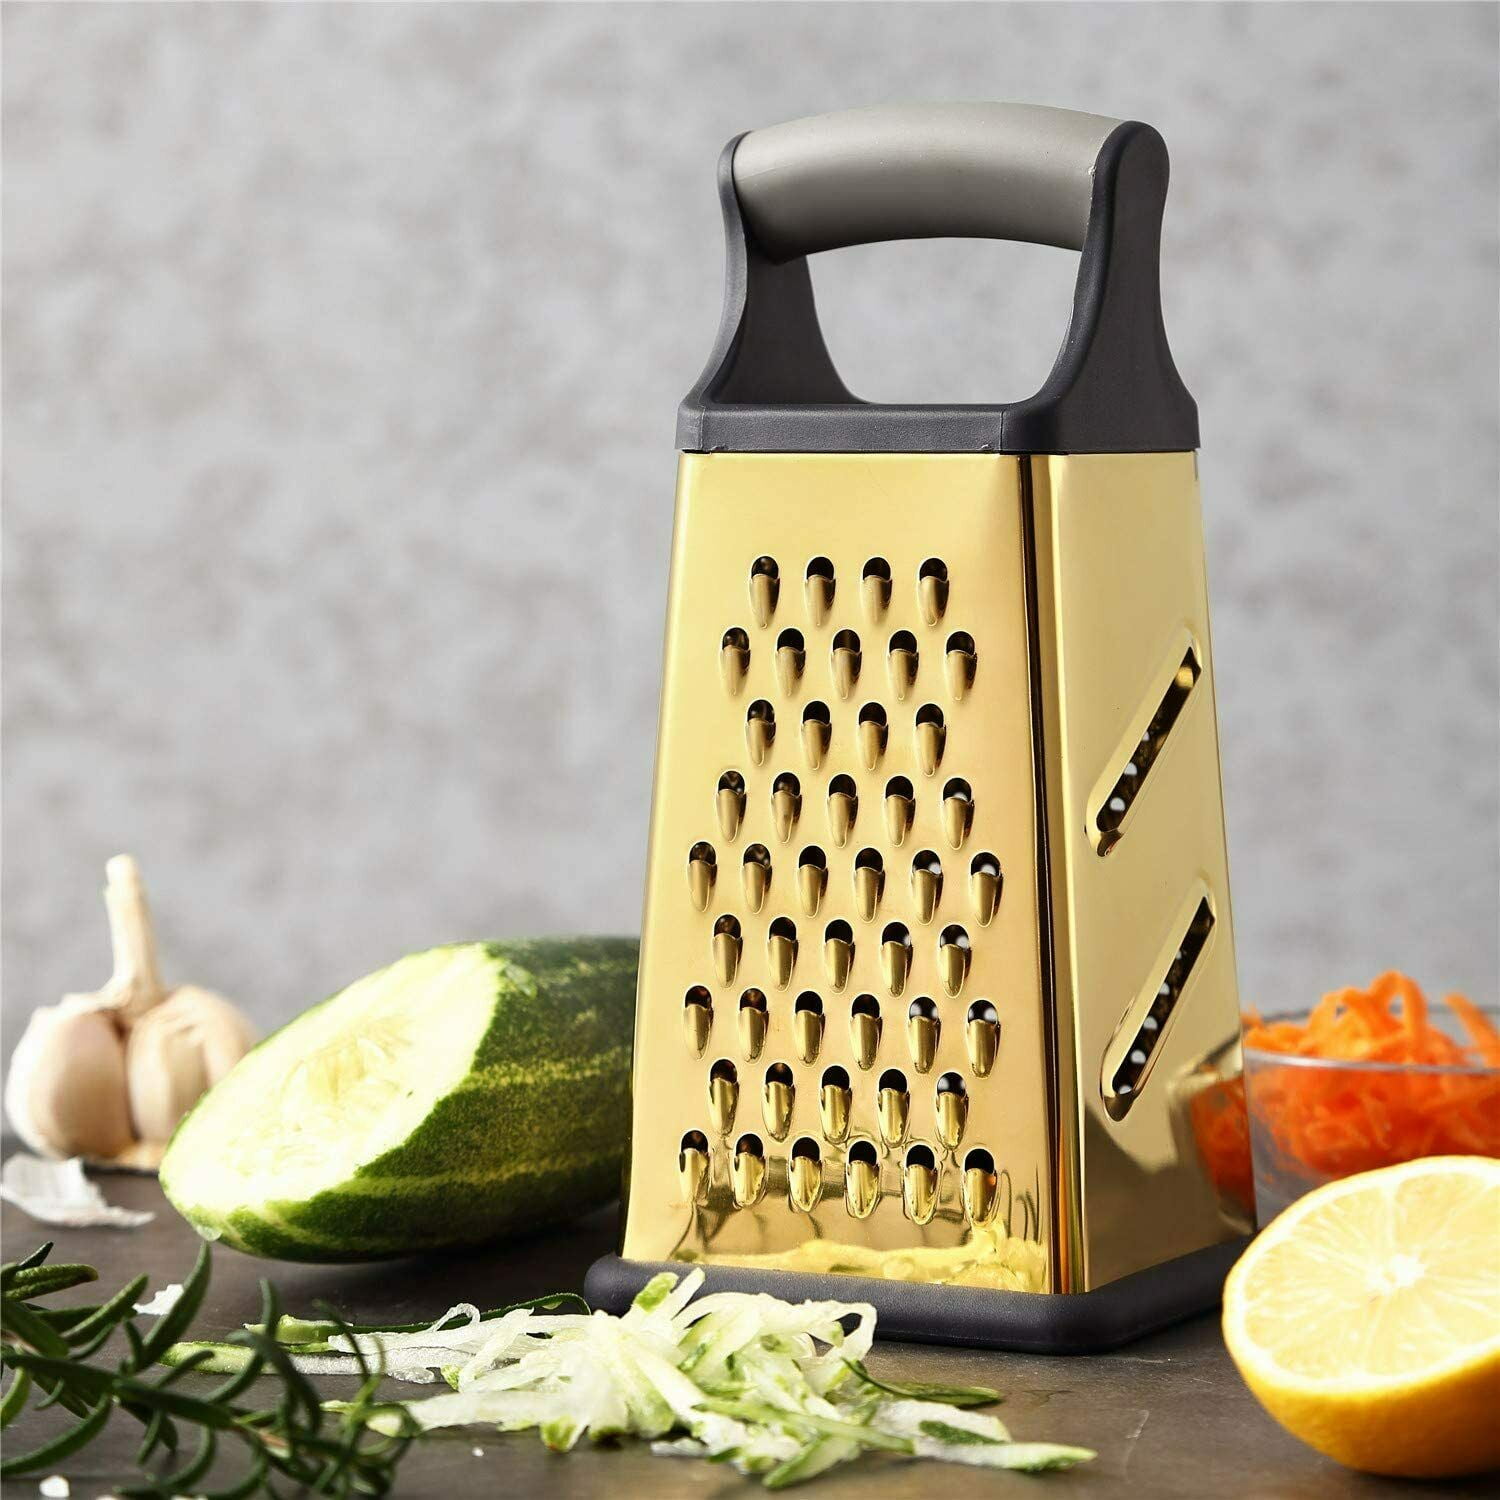 Grater Bowl Rainbow - Small Cheese Grater with Container, Potato Grater, MINGYU 18/8 Stainless Steel Kitchen Gadgets Tools for Ginger, Vegetables